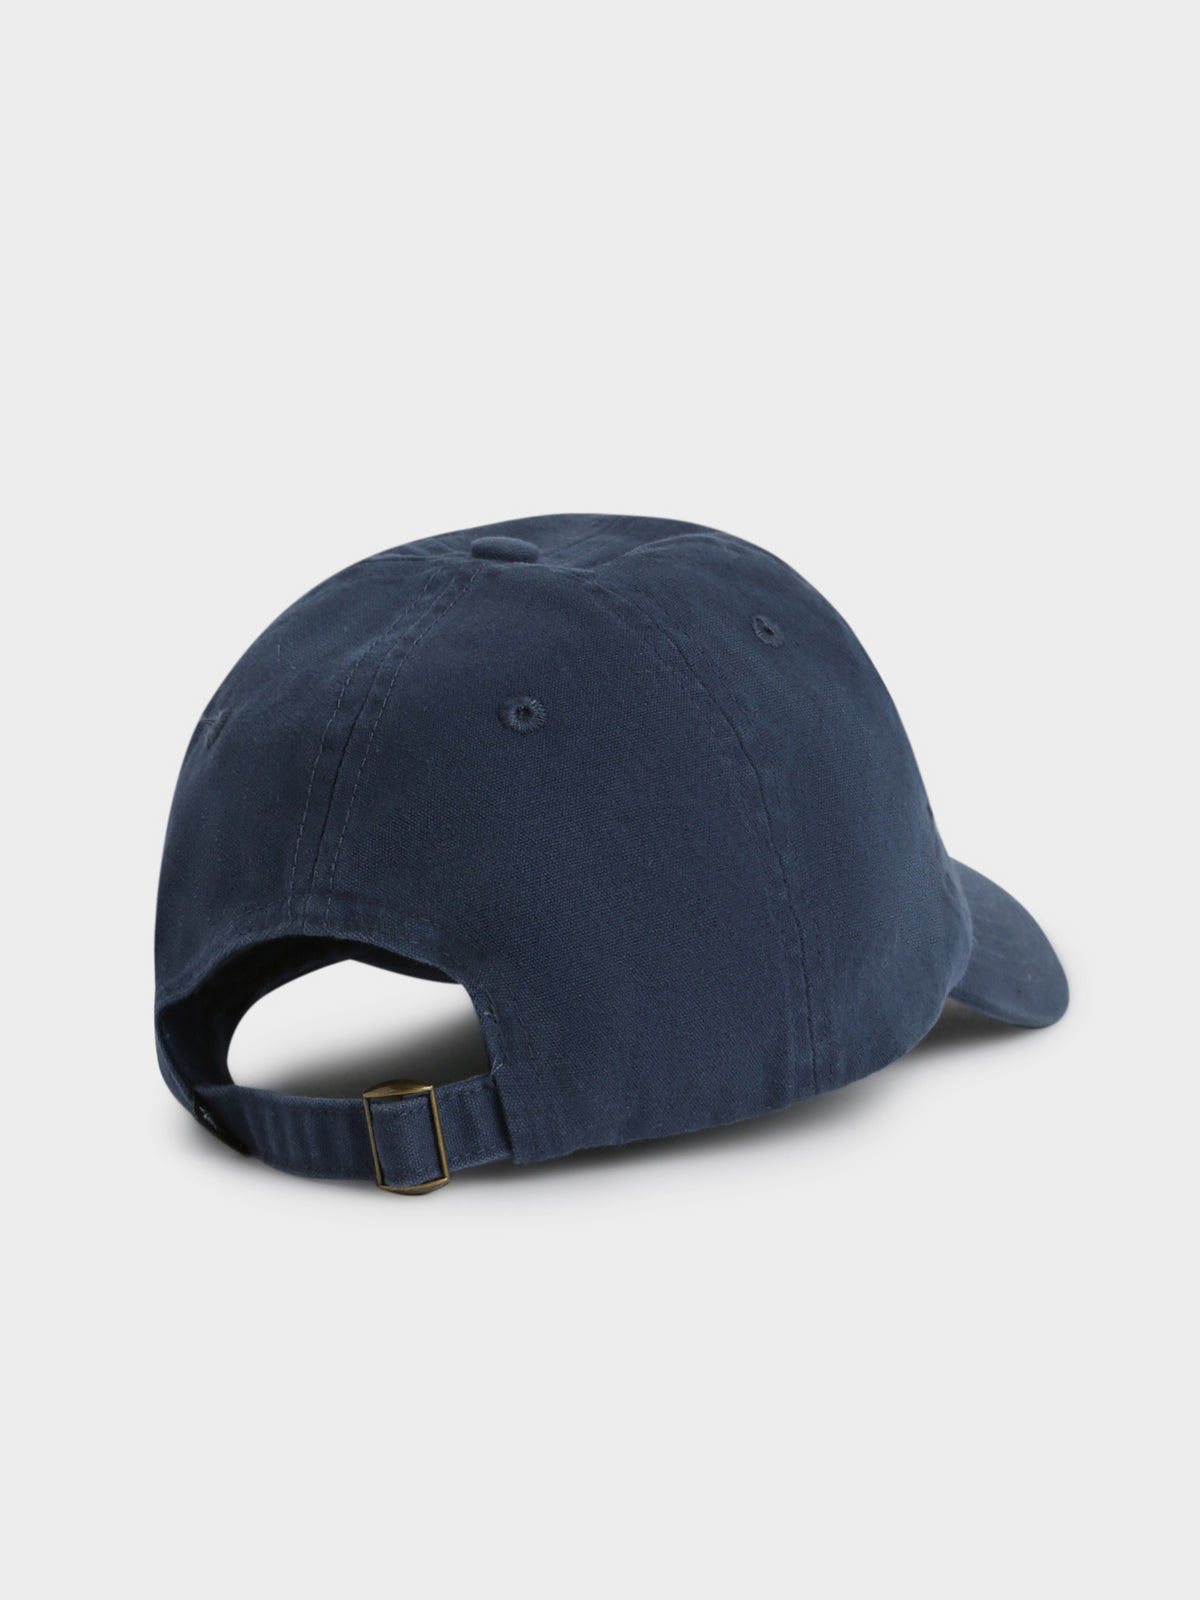 1980 Low-Pro Cap in Navy and Burgundy